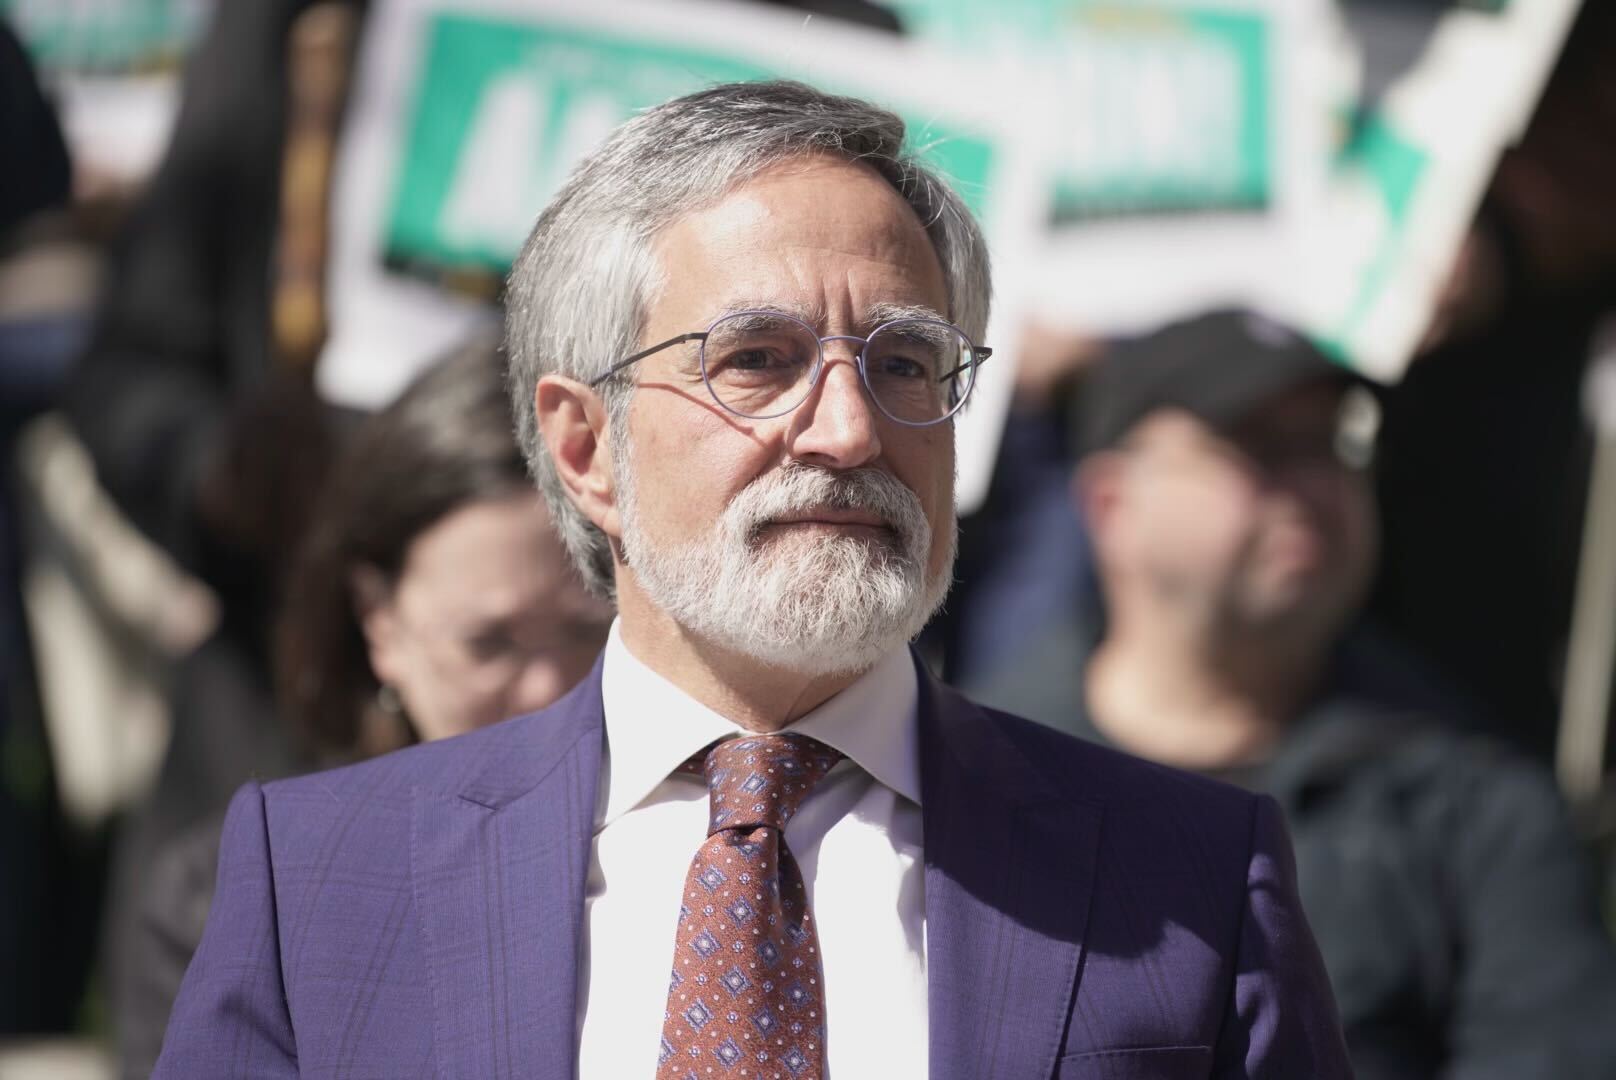 A man with gray hair and a beard, wearing glasses, a purple suit, and a patterned tie.